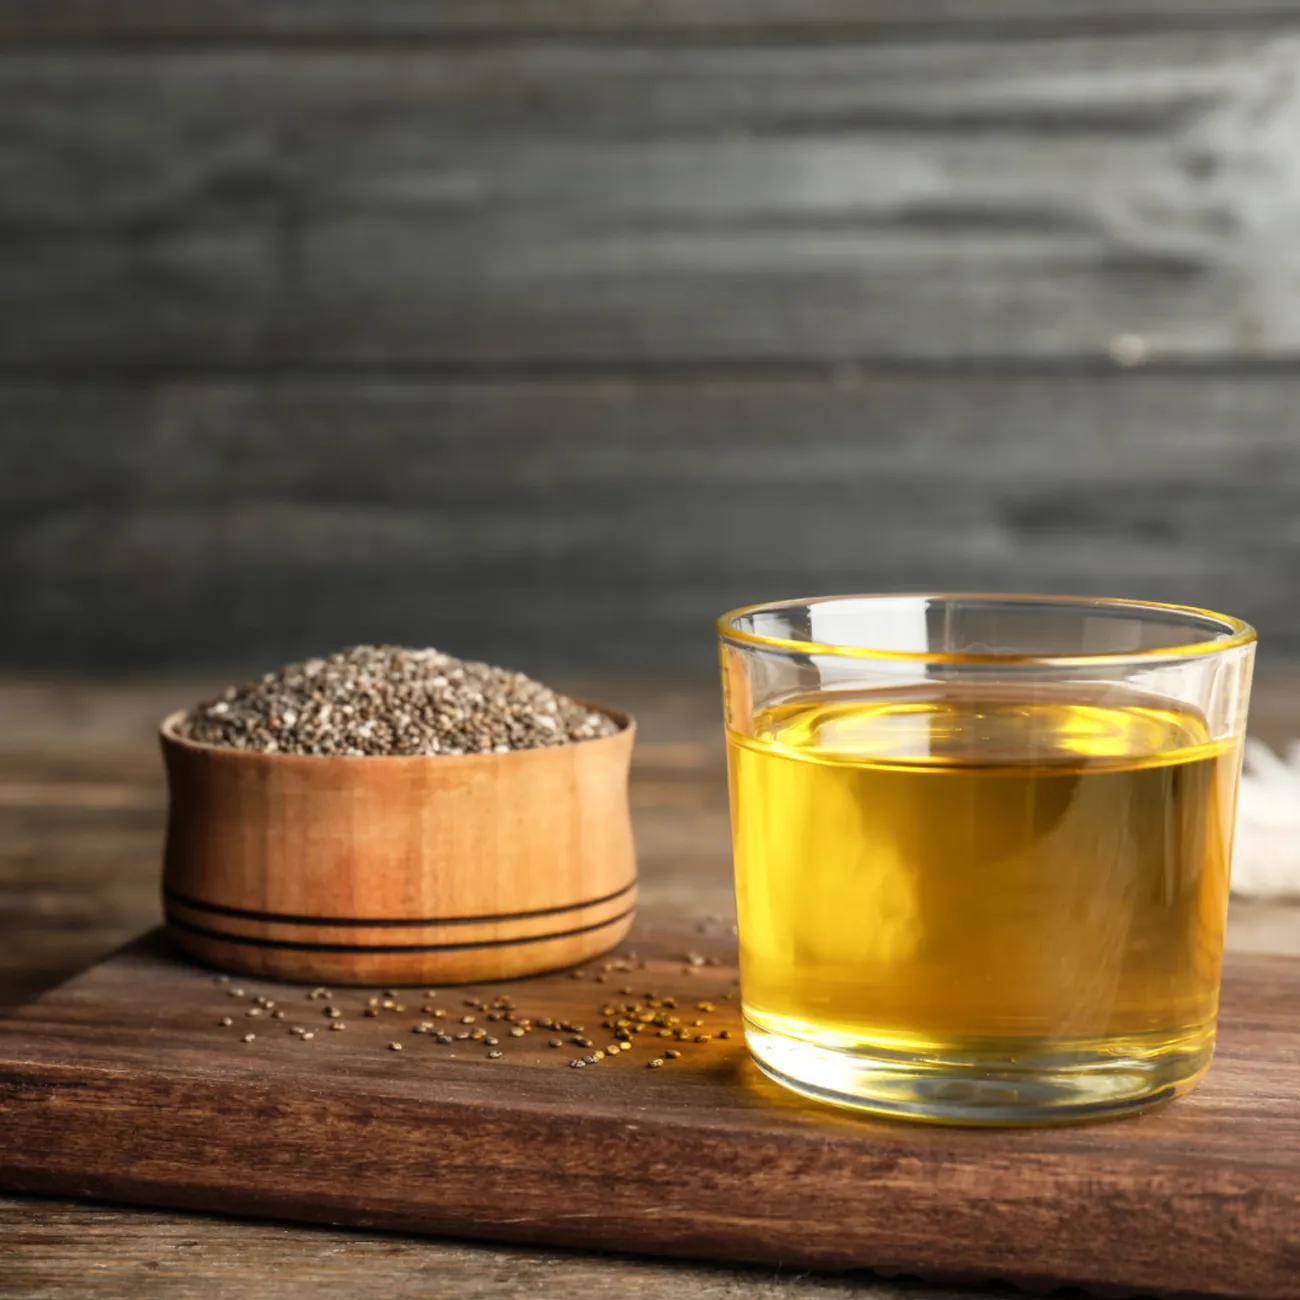 Chia Oil: A functional food with notable cardiovascular benefits